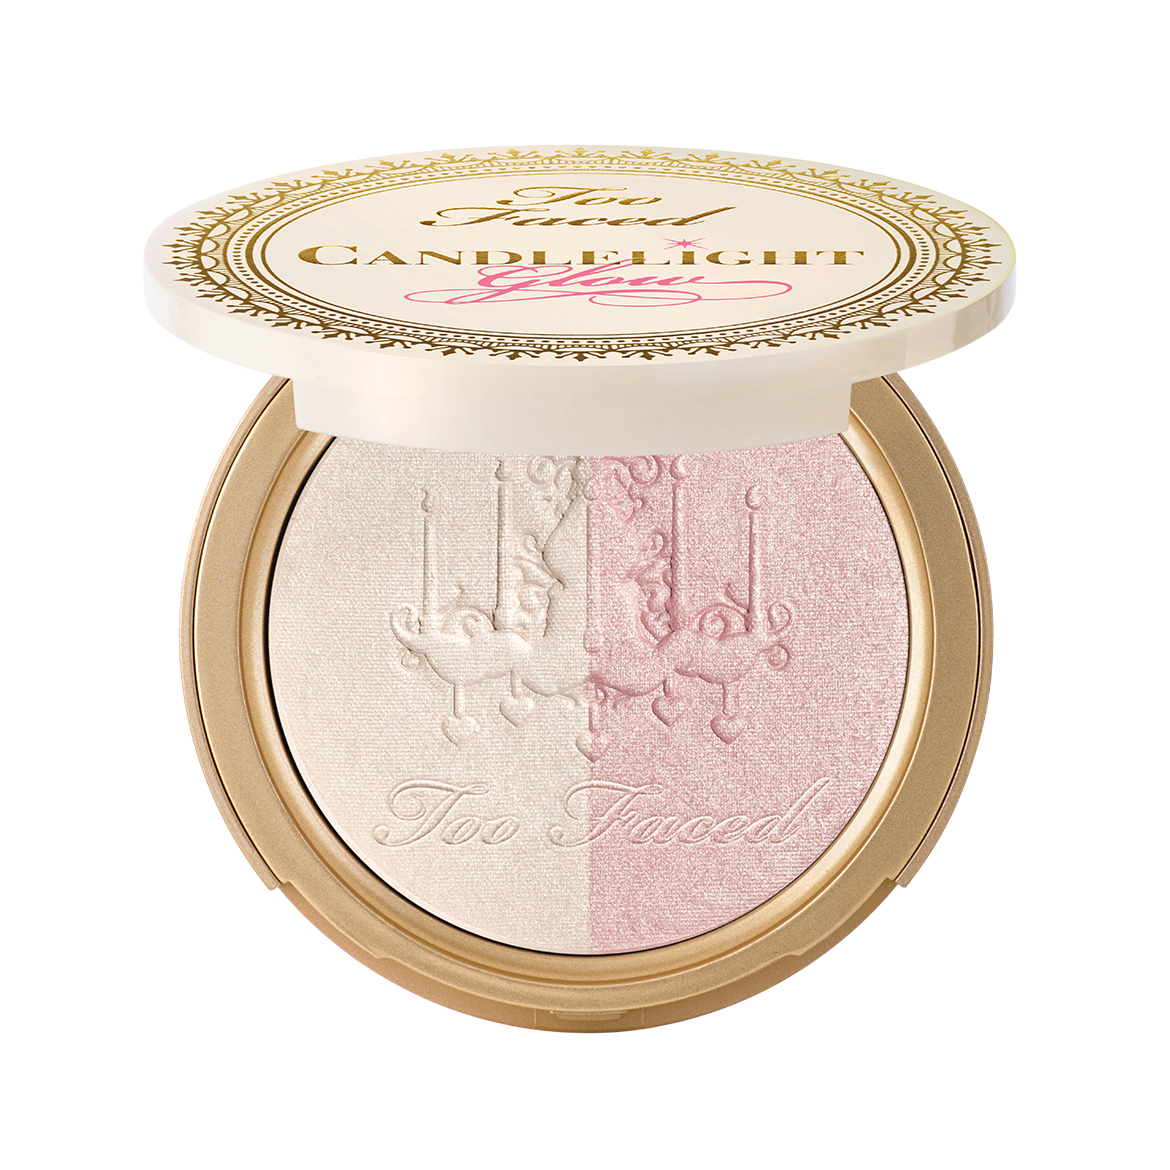 Too Faced Candlelight Glow Highlighter